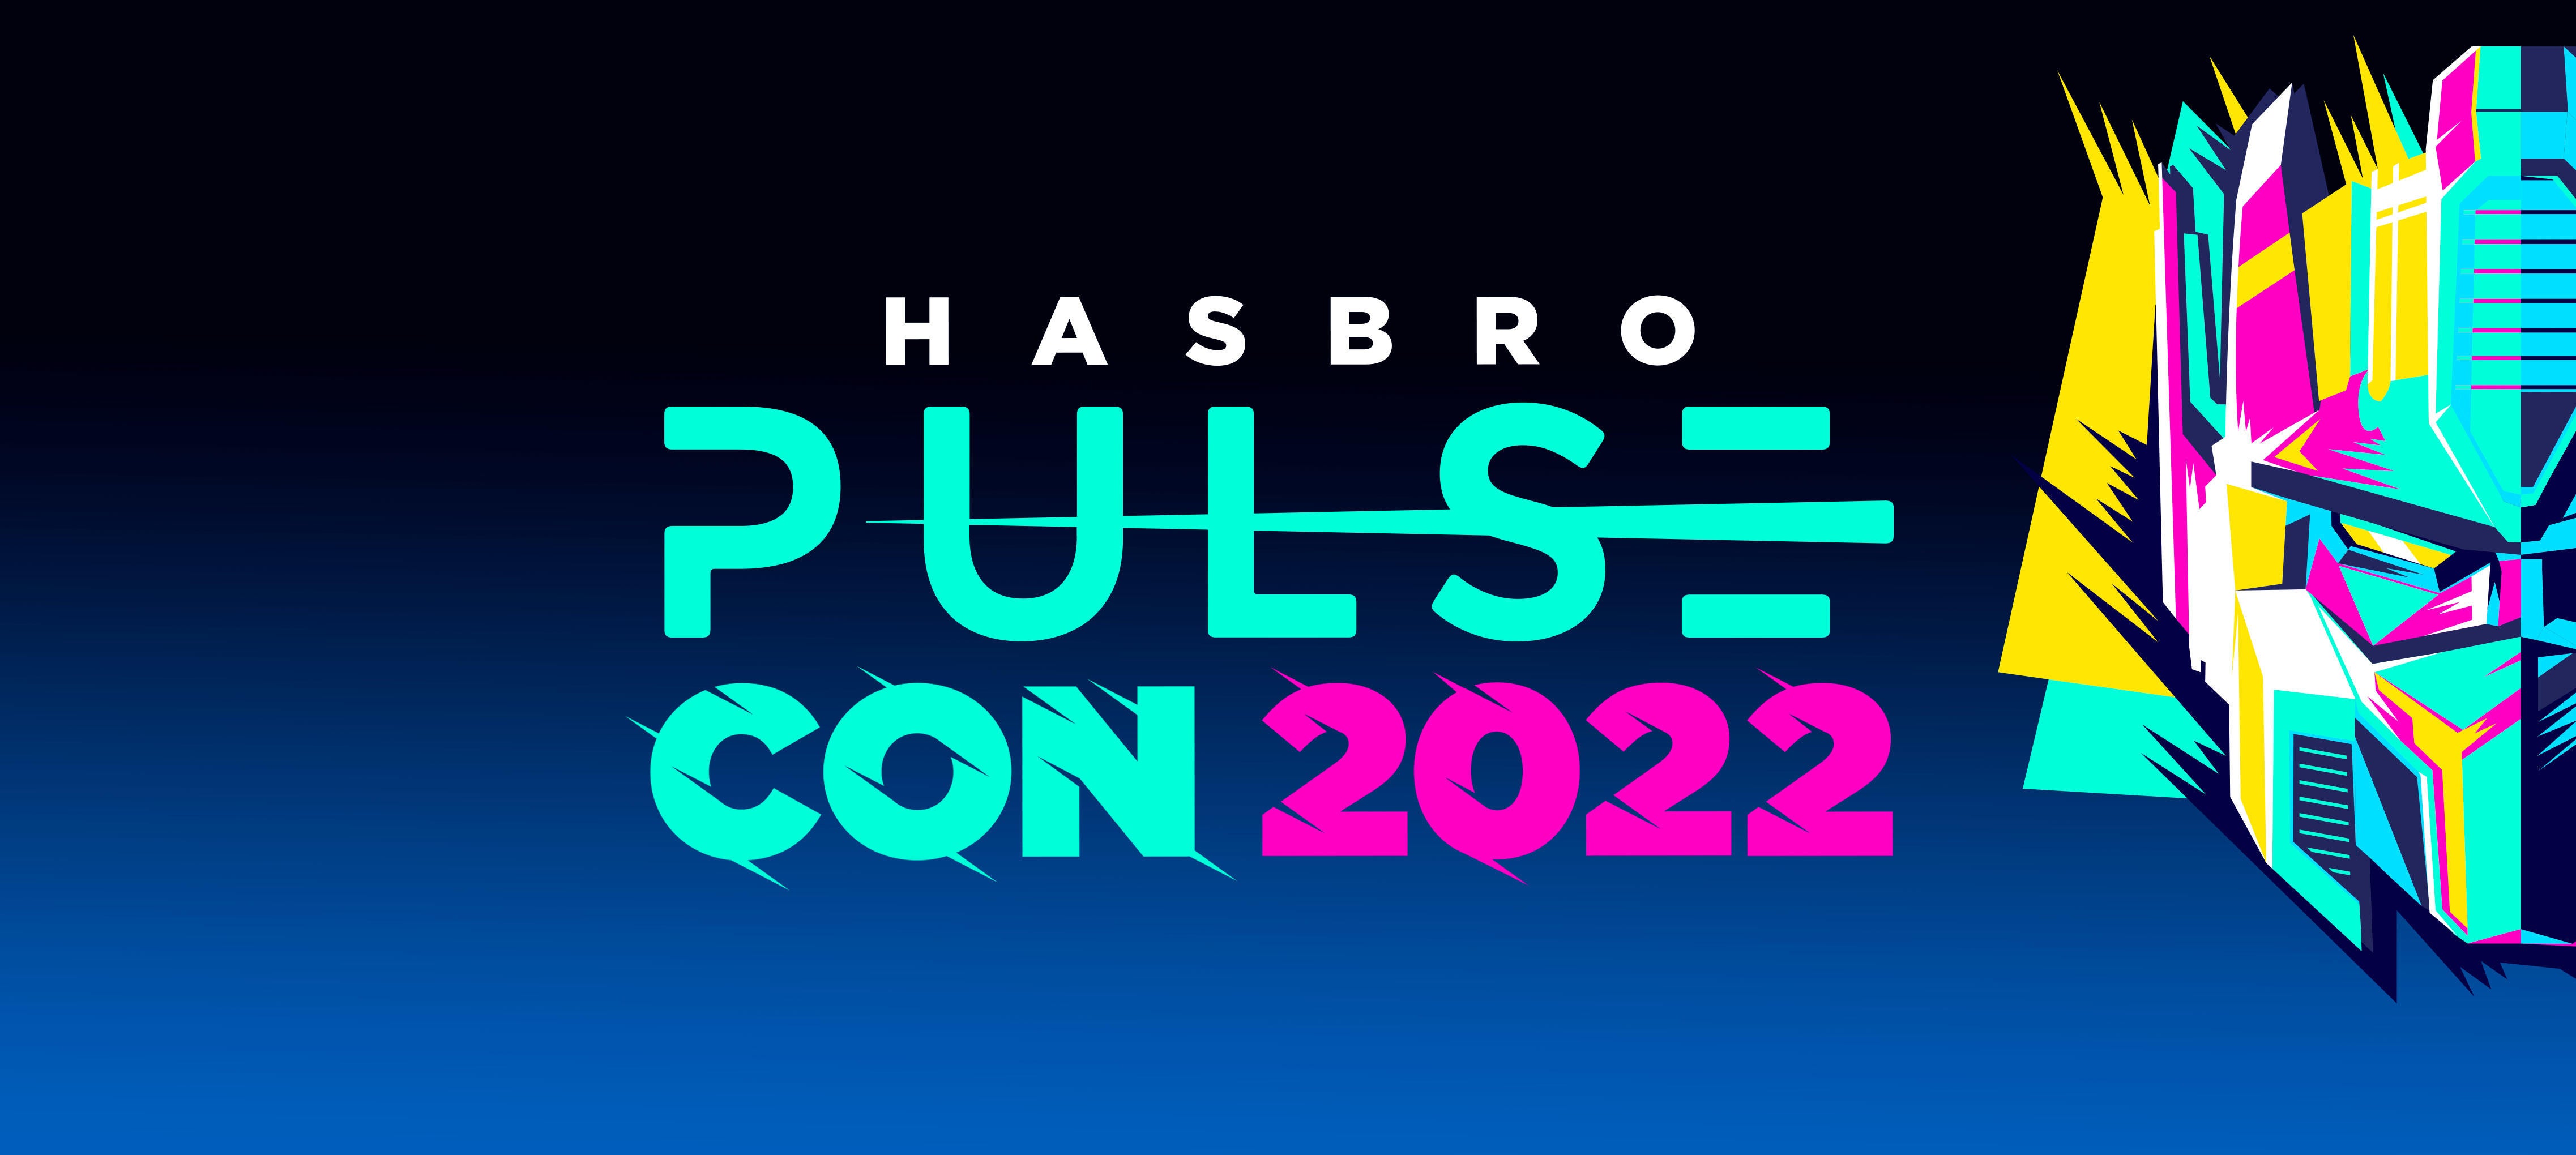 Here’s Where to Get Hasbro Pulse Con 2022 Exclusives: The Complete List